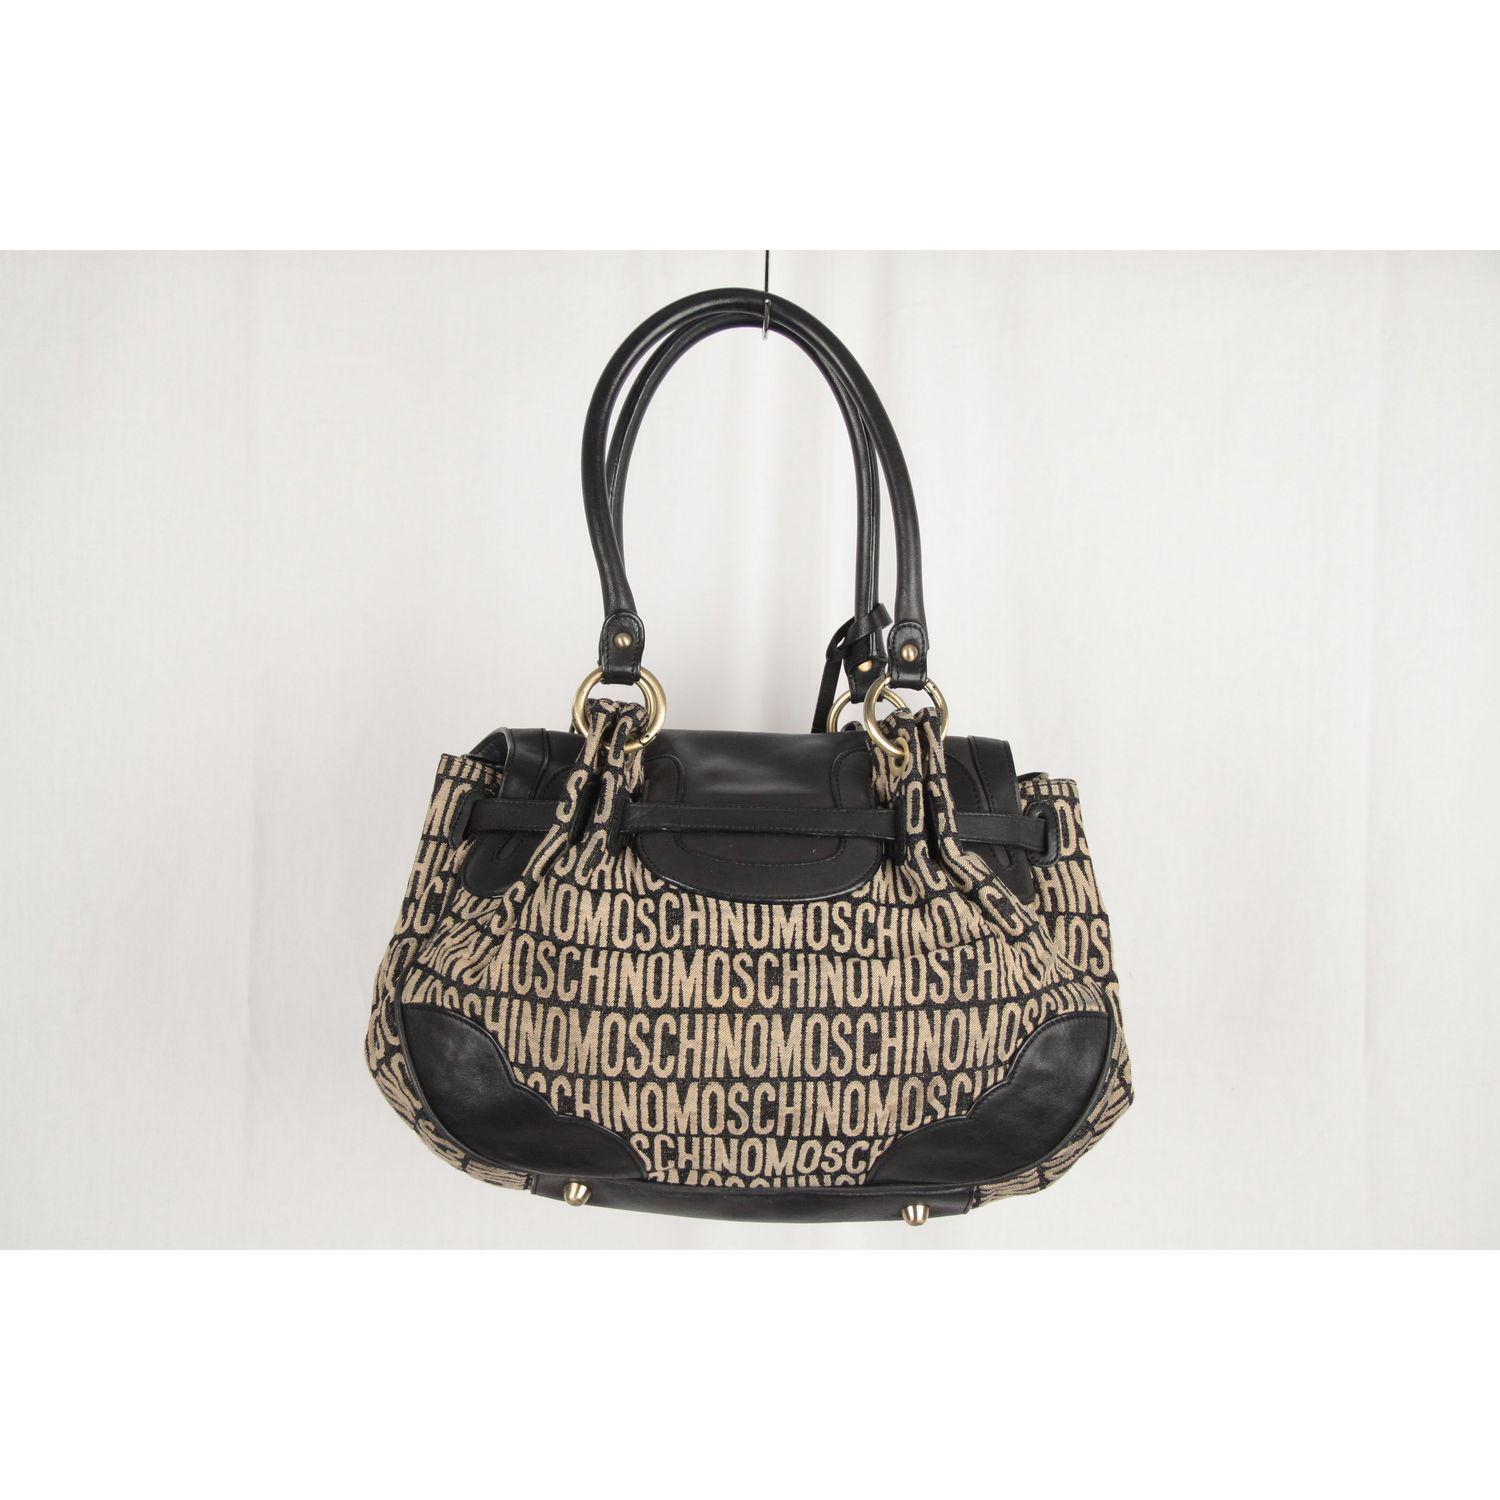 Moschino Two Tone Monogram Canvas/leather Top Handle Bag in Black - Lyst